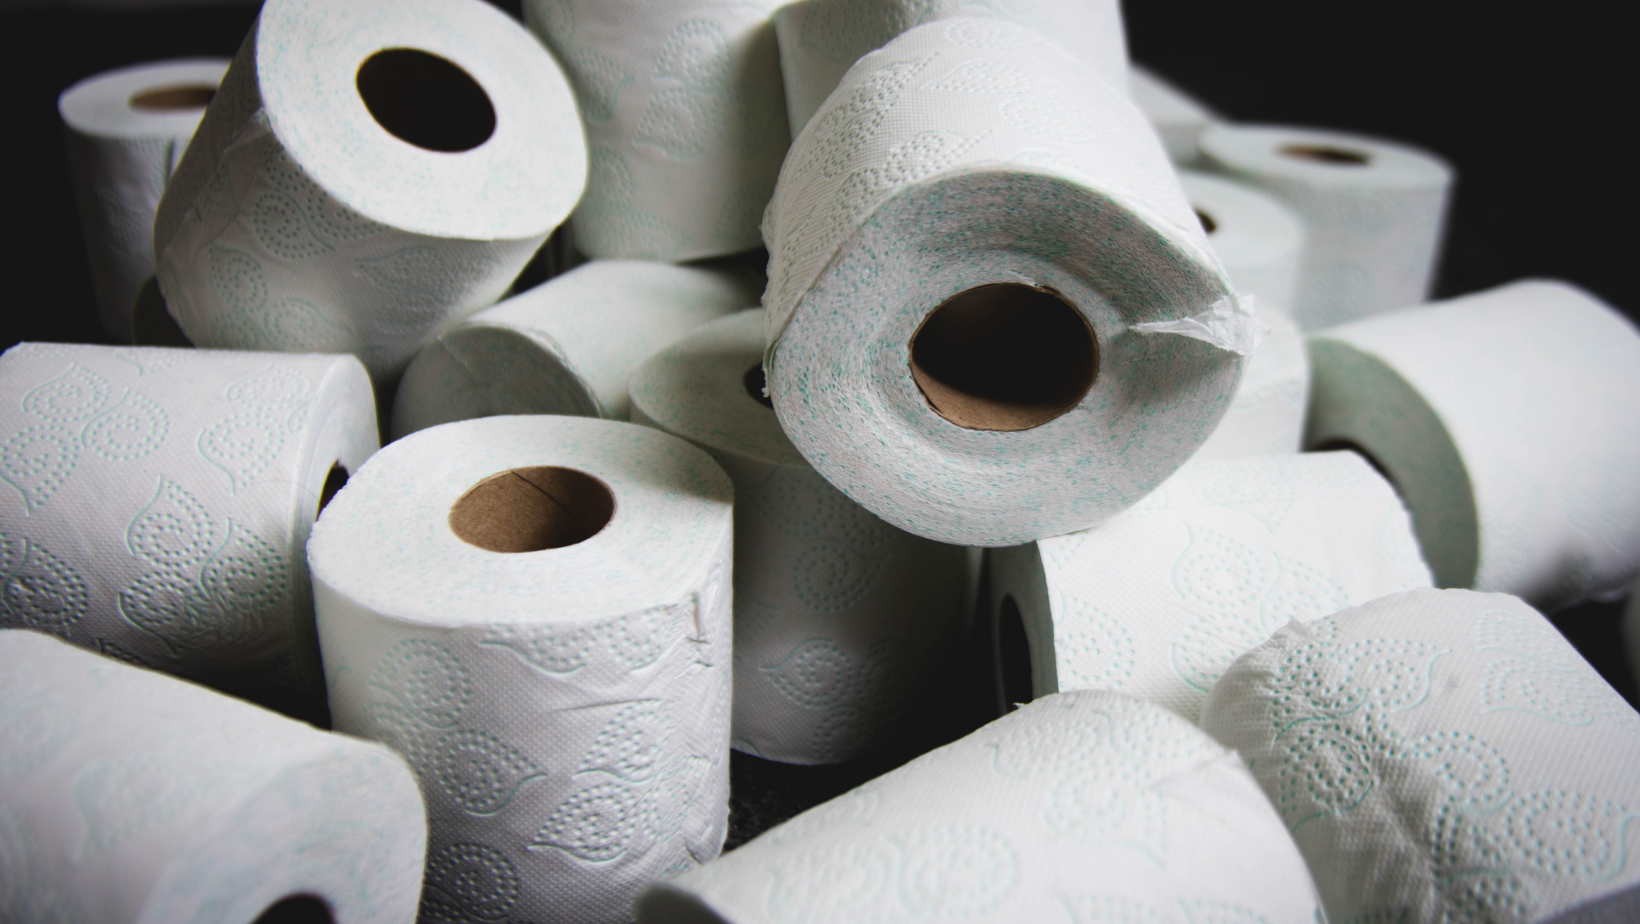 By exiting the market, Charmin paved the way for other toilet paper brands.  Photos: Archive